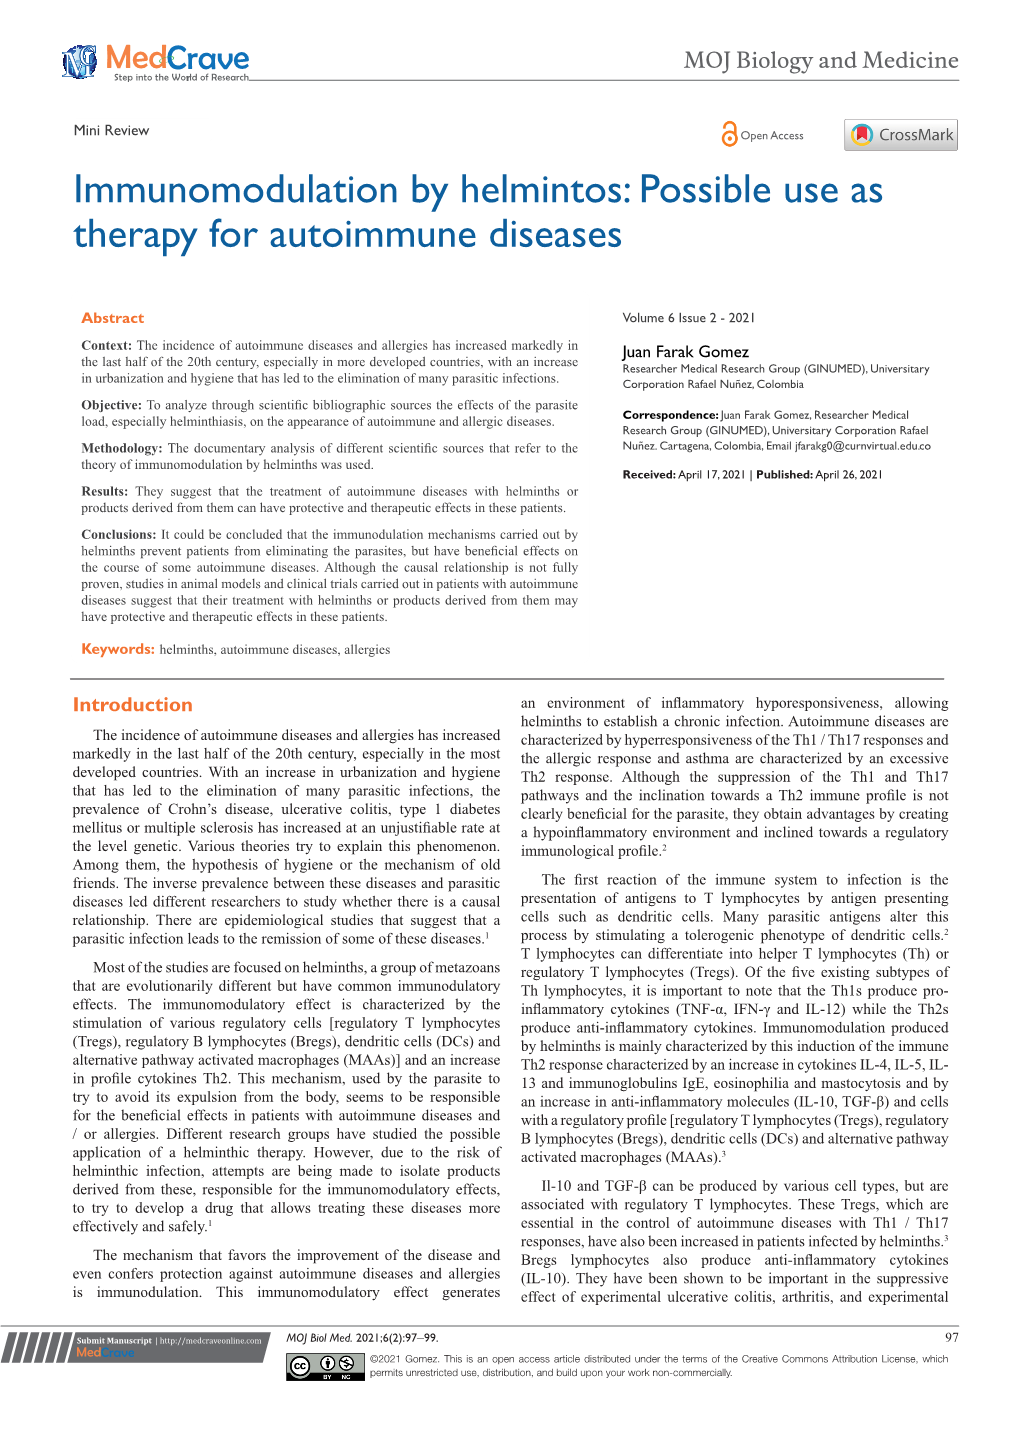 Immunomodulation by Helmintos: Possible Use As Therapy for Autoimmune Diseases